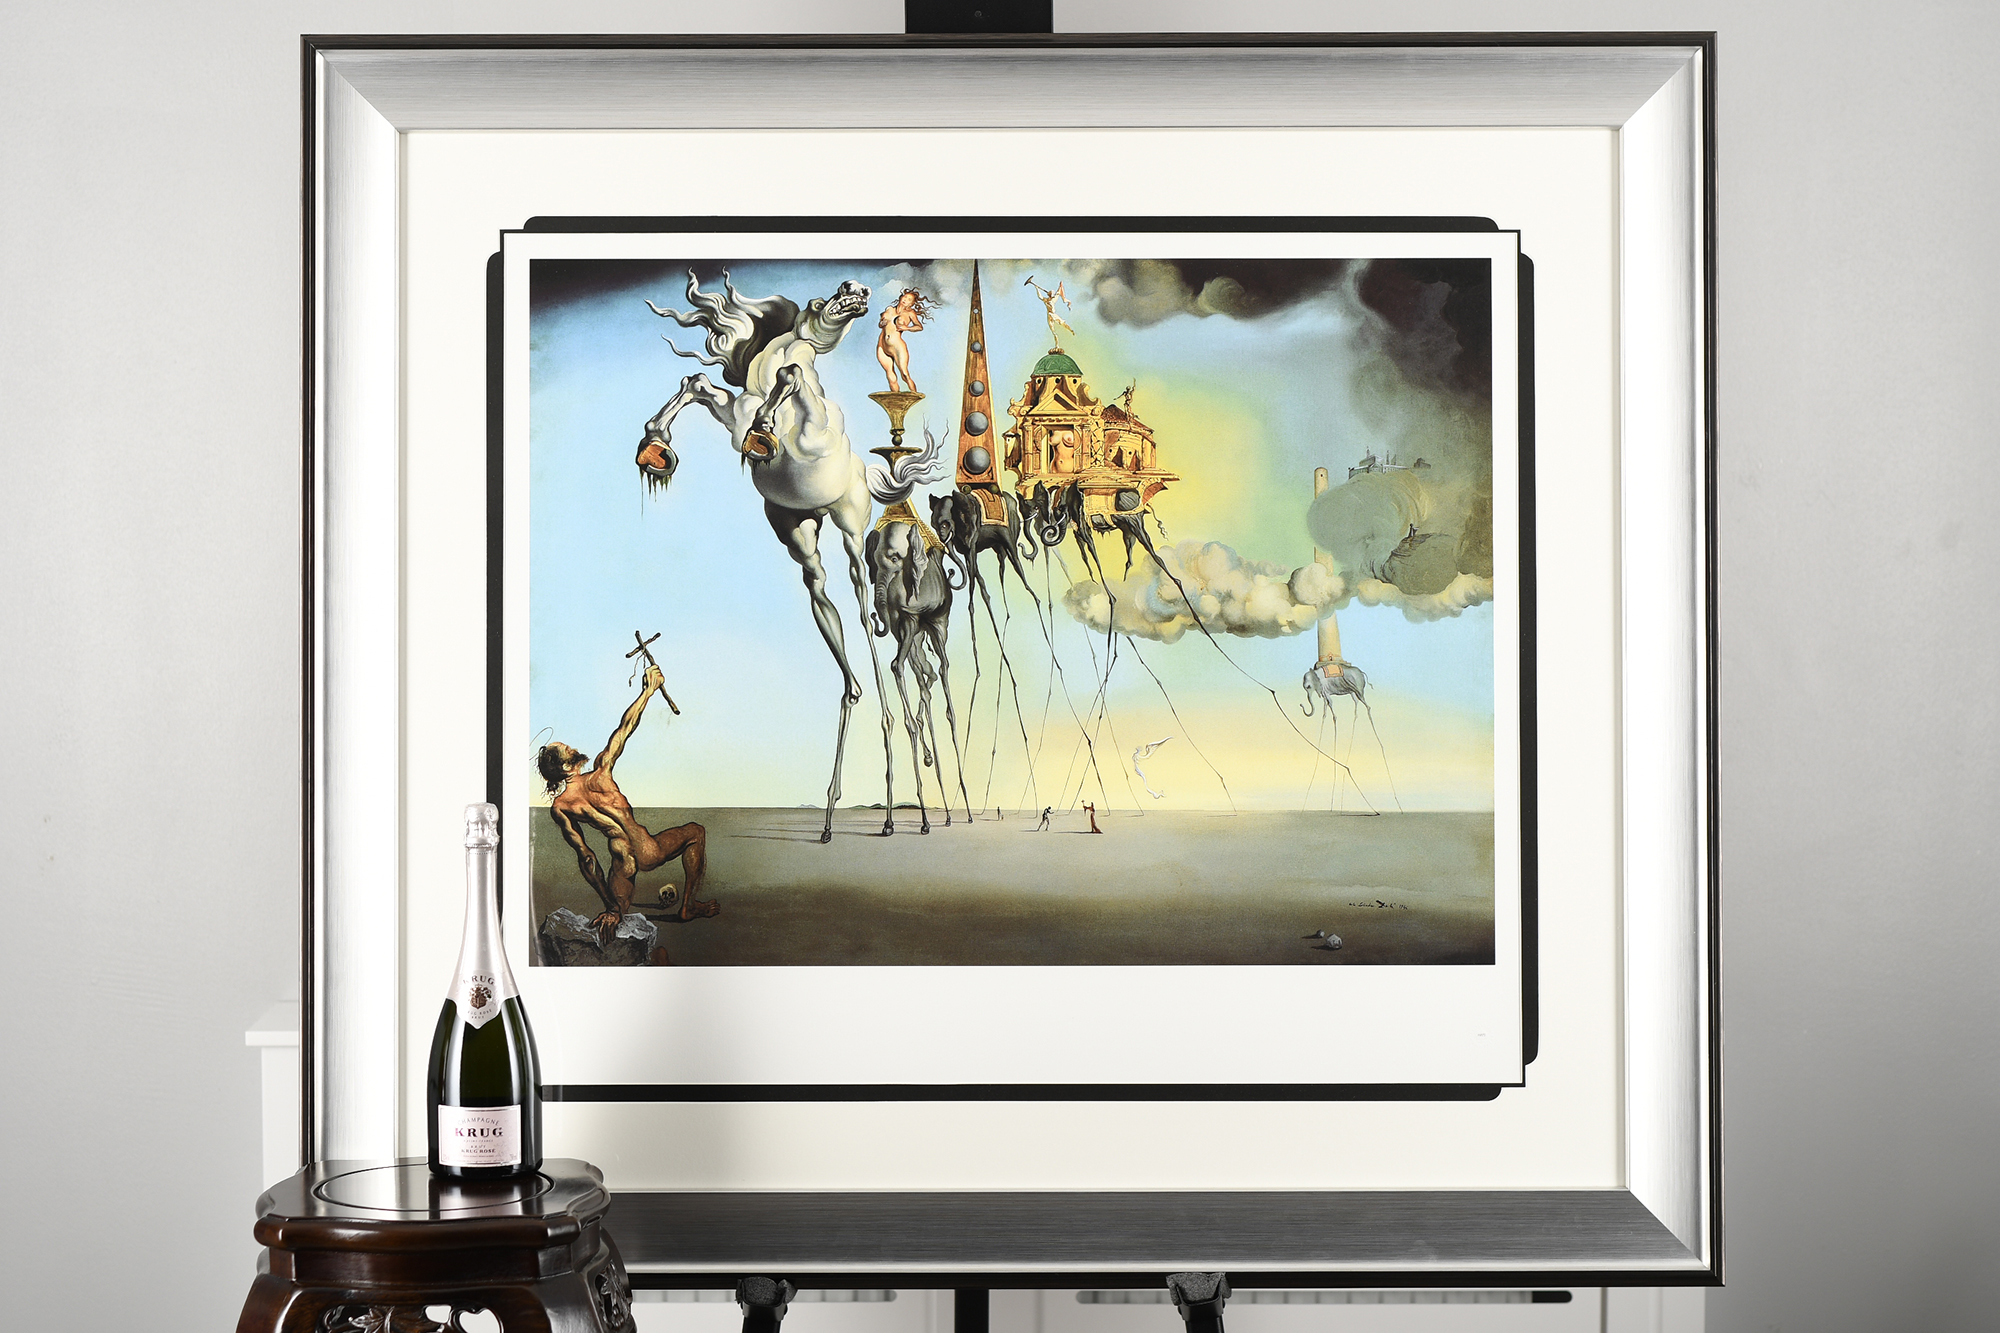 Salvador Dali Limited Edition "The Temptation of St. Anthony, 1942" - Image 7 of 10